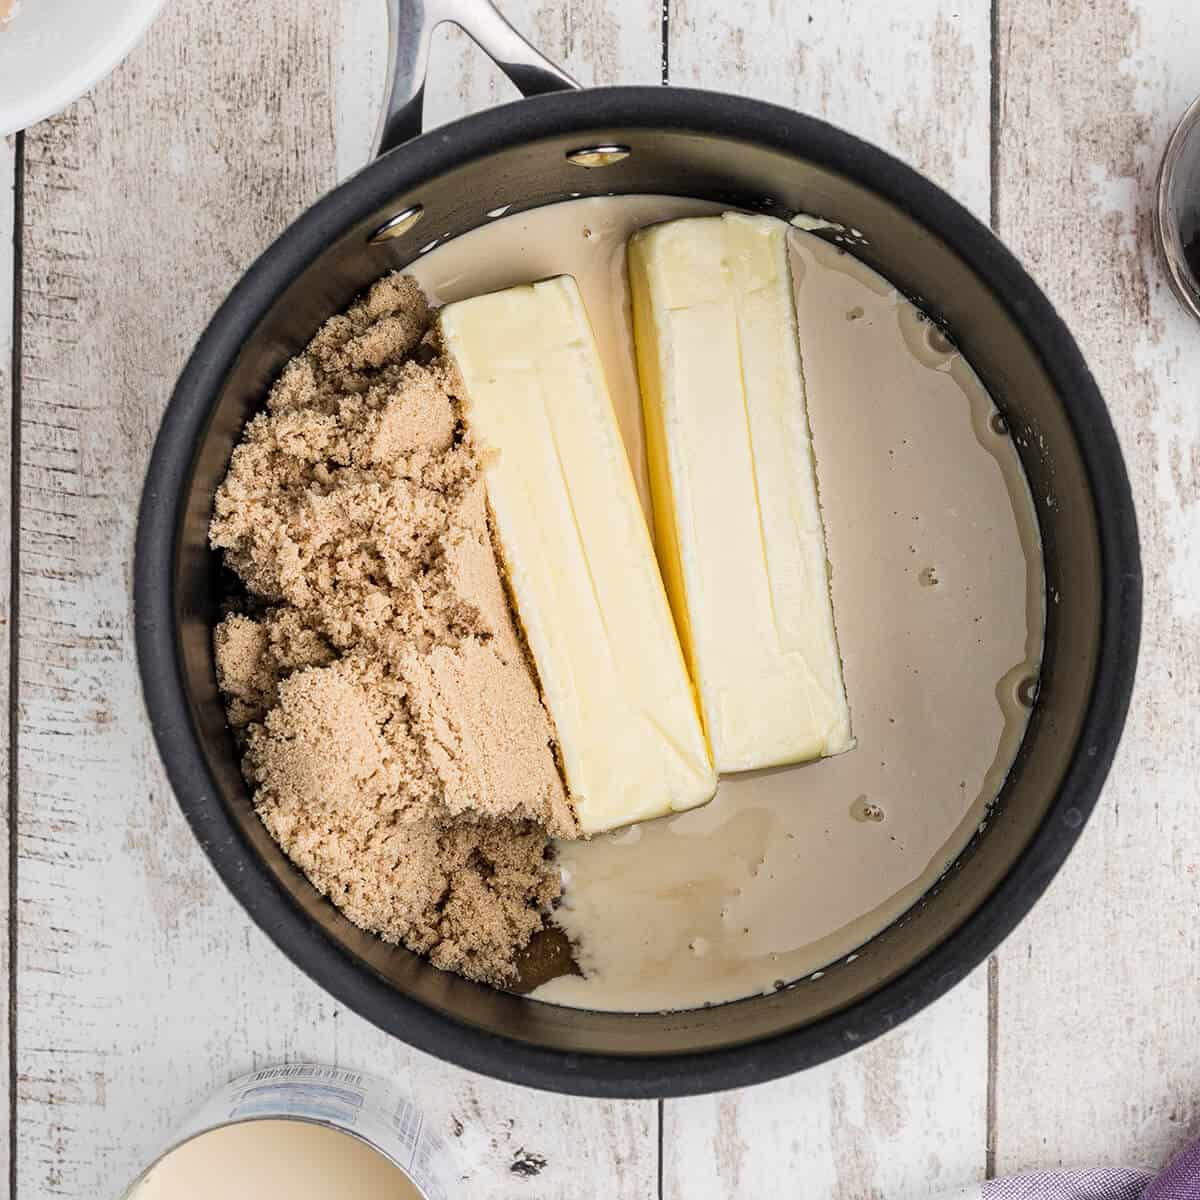 Butter, brown sugar, and evaporated milk in a saucepan.